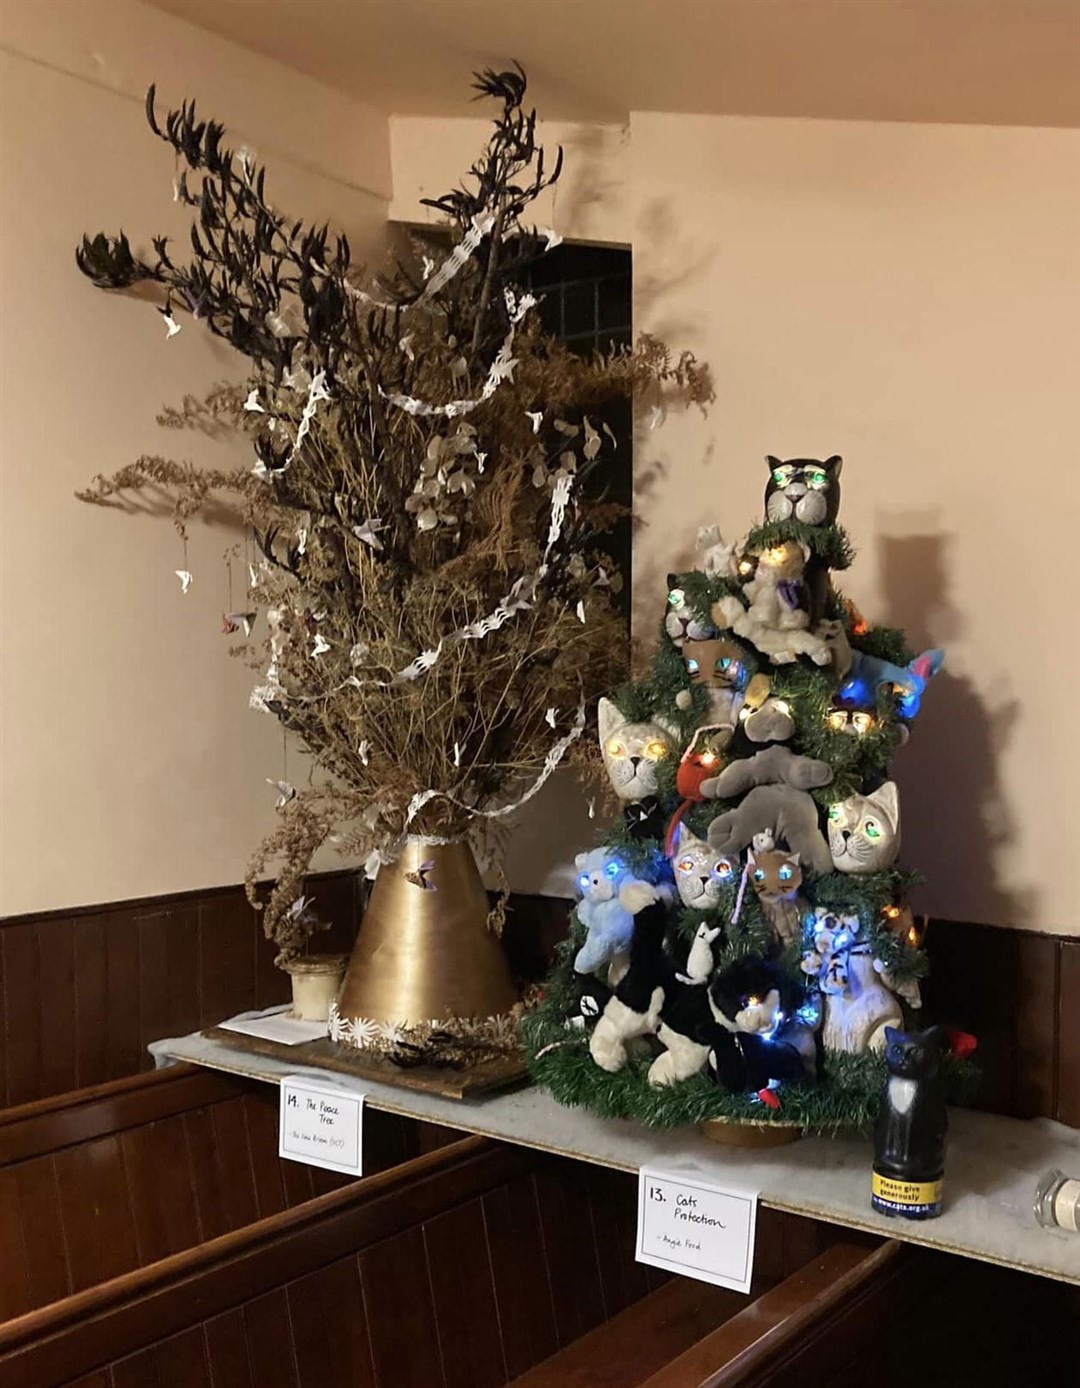 The Peace tree, and Cats Proetction tree.